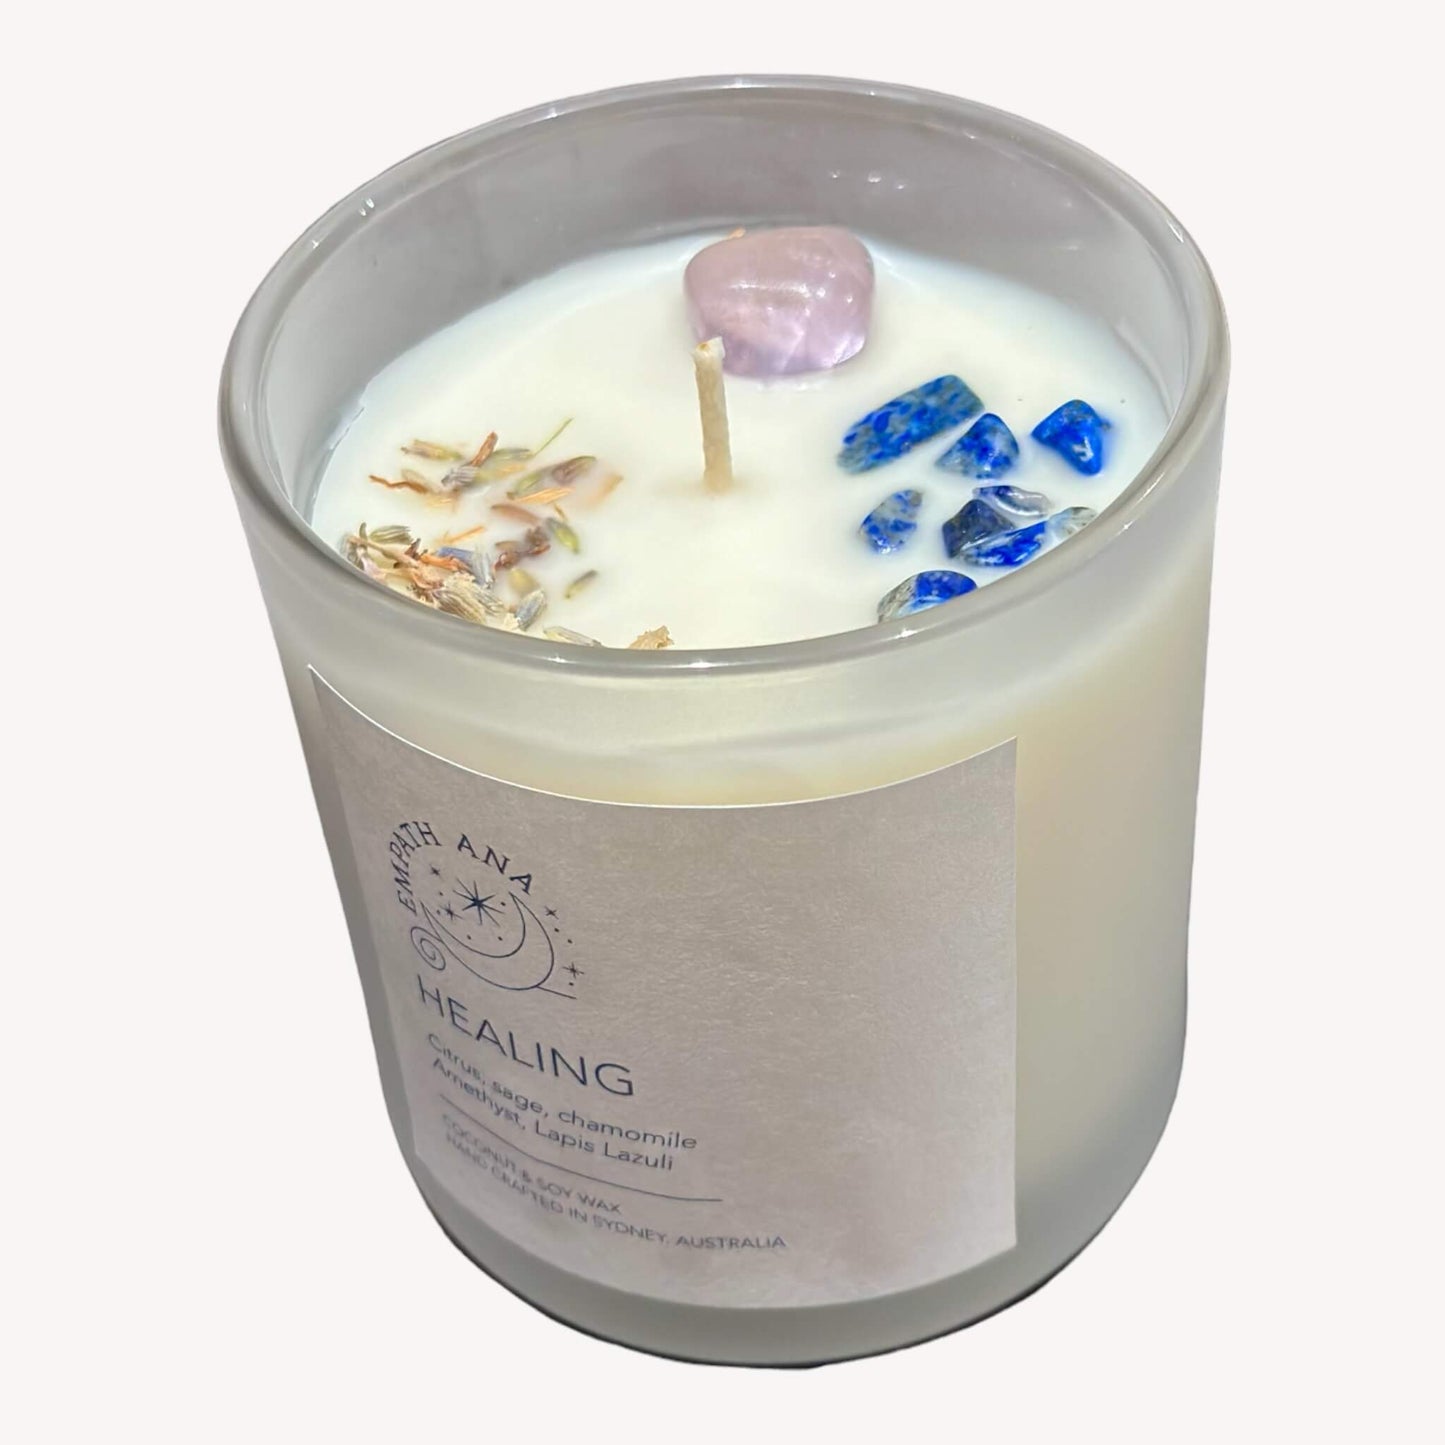 Empath Ana's Healing Intention Crystal Candle - Top view of the same candle jar, revealing Amethyst and Lapis Lazuli crystals embedded in the coconut/soy wax, surrounded by healing herbs. The crystals are complemented by an uplifting Citrus Sage & Chamomile fragrance